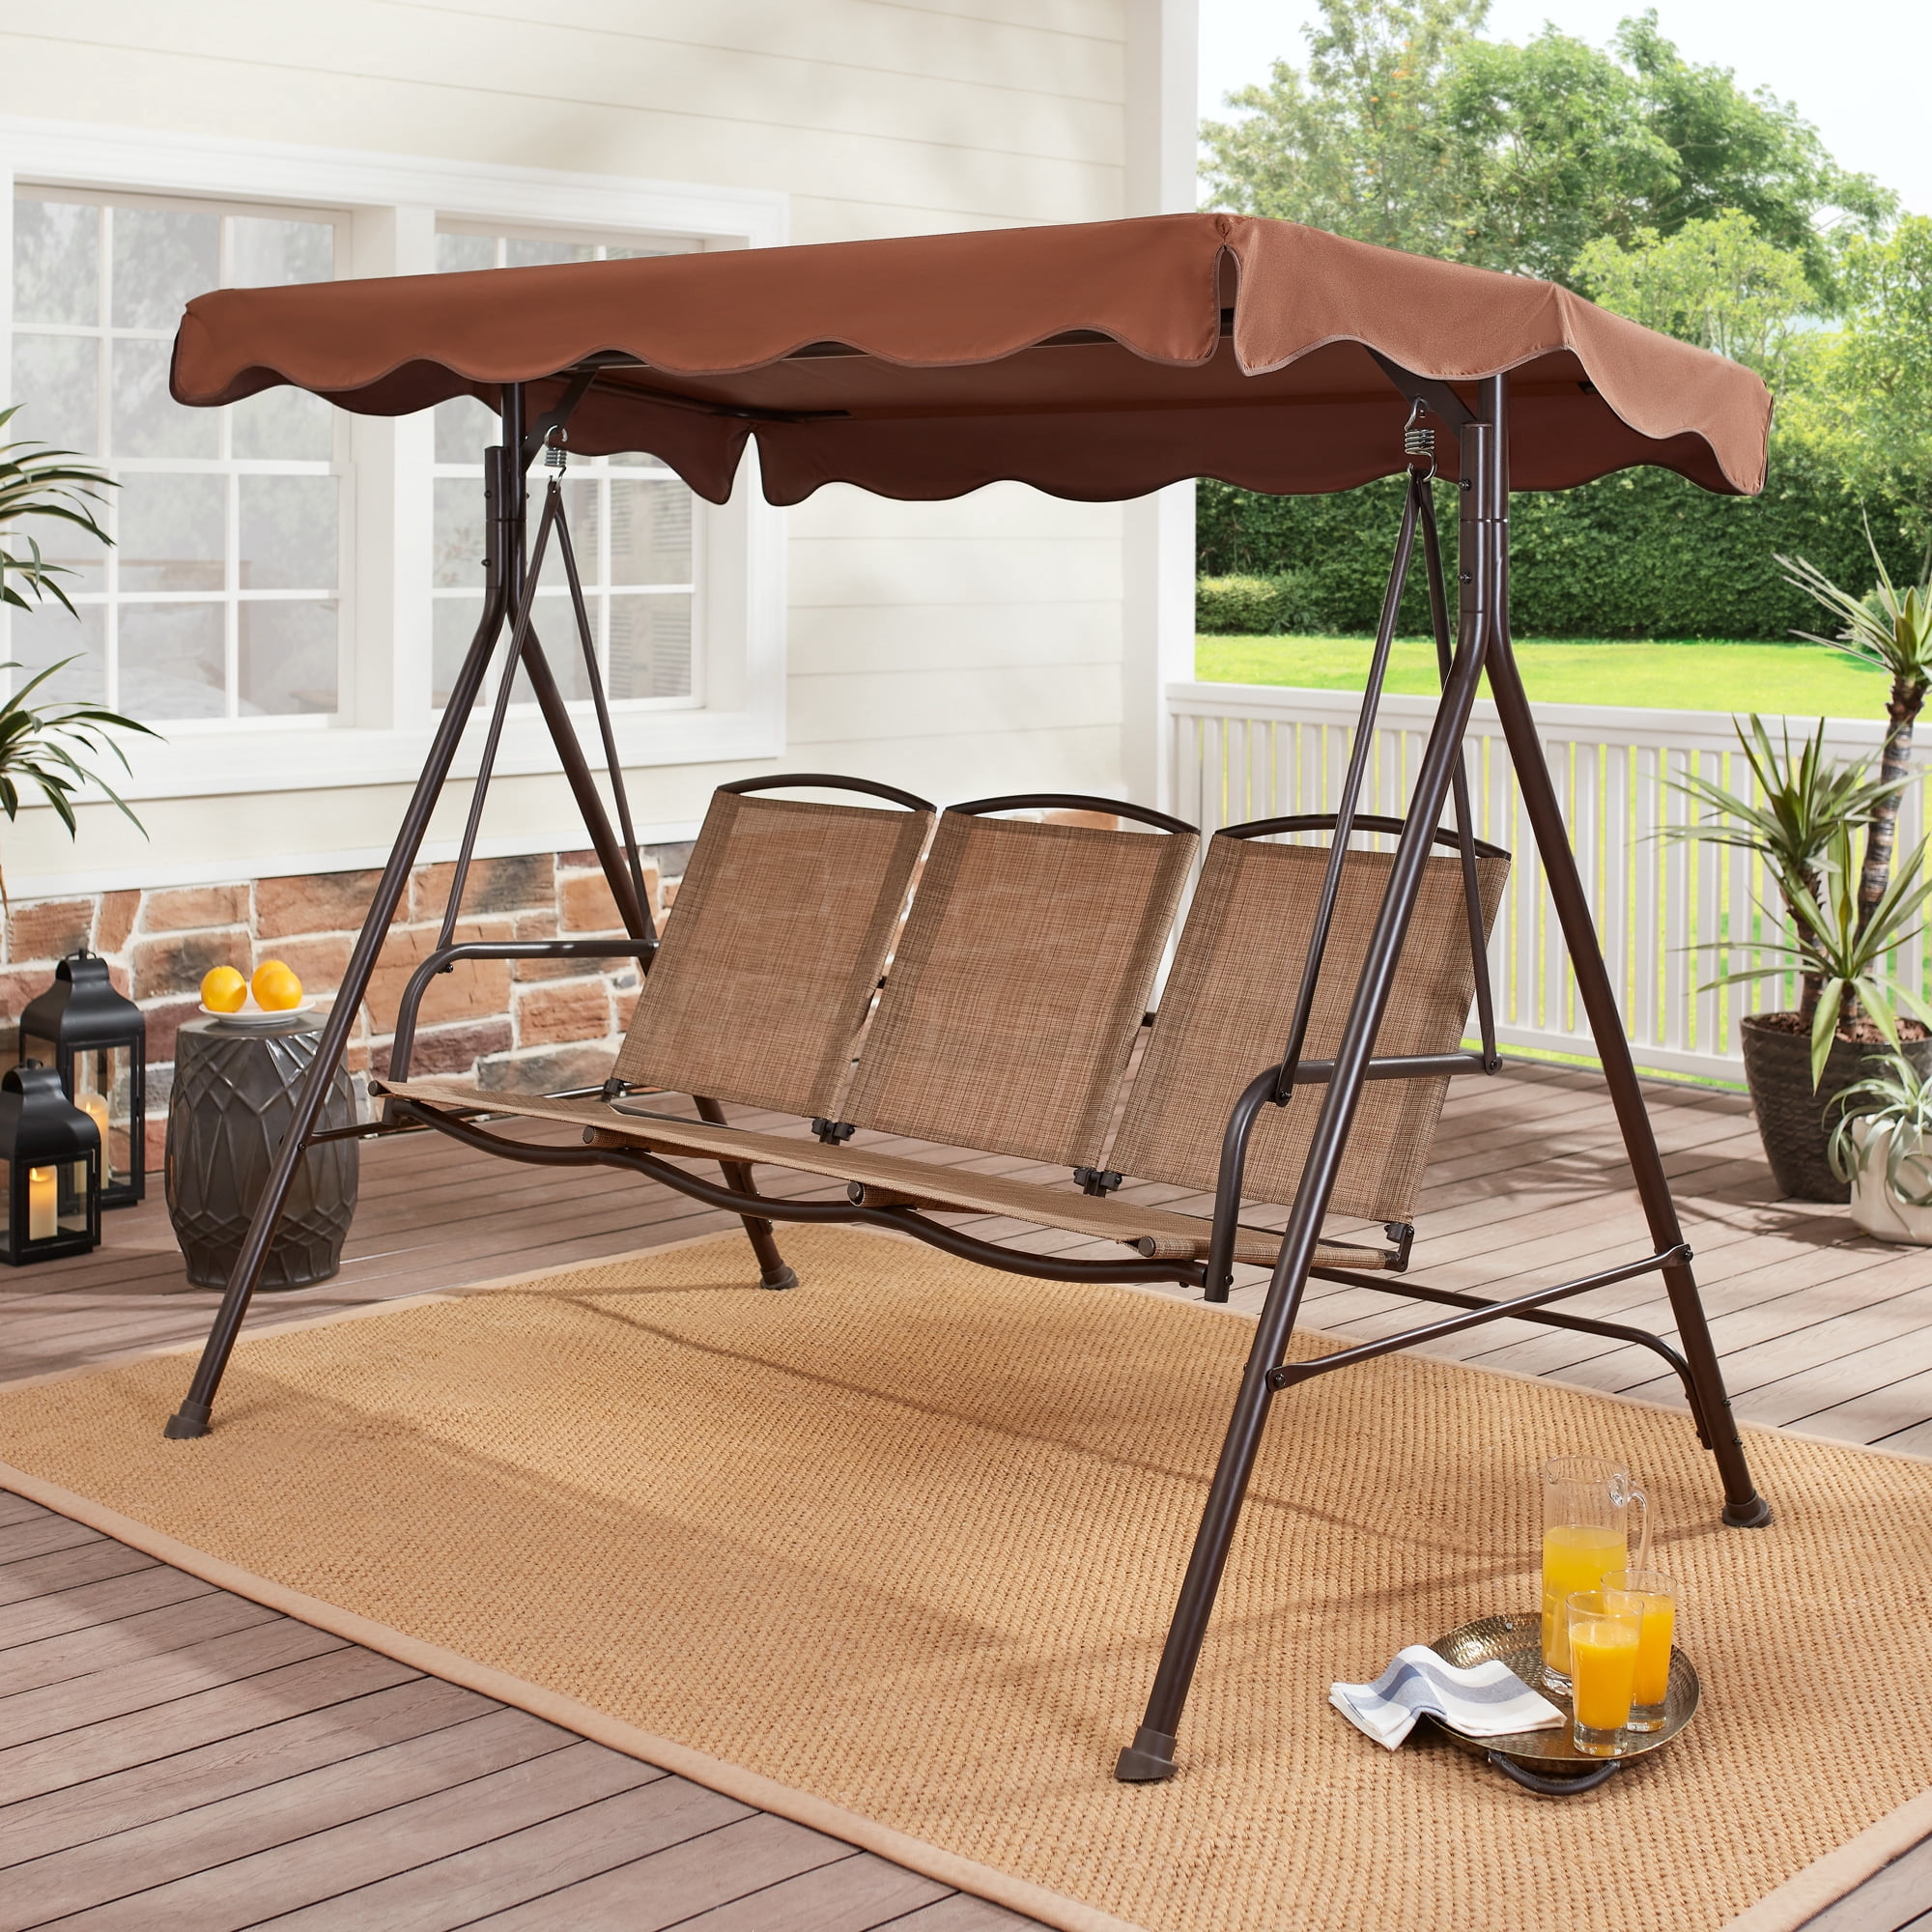 Mainstays Sand Dune Canopy Steel Porch Swing - Brown/Black